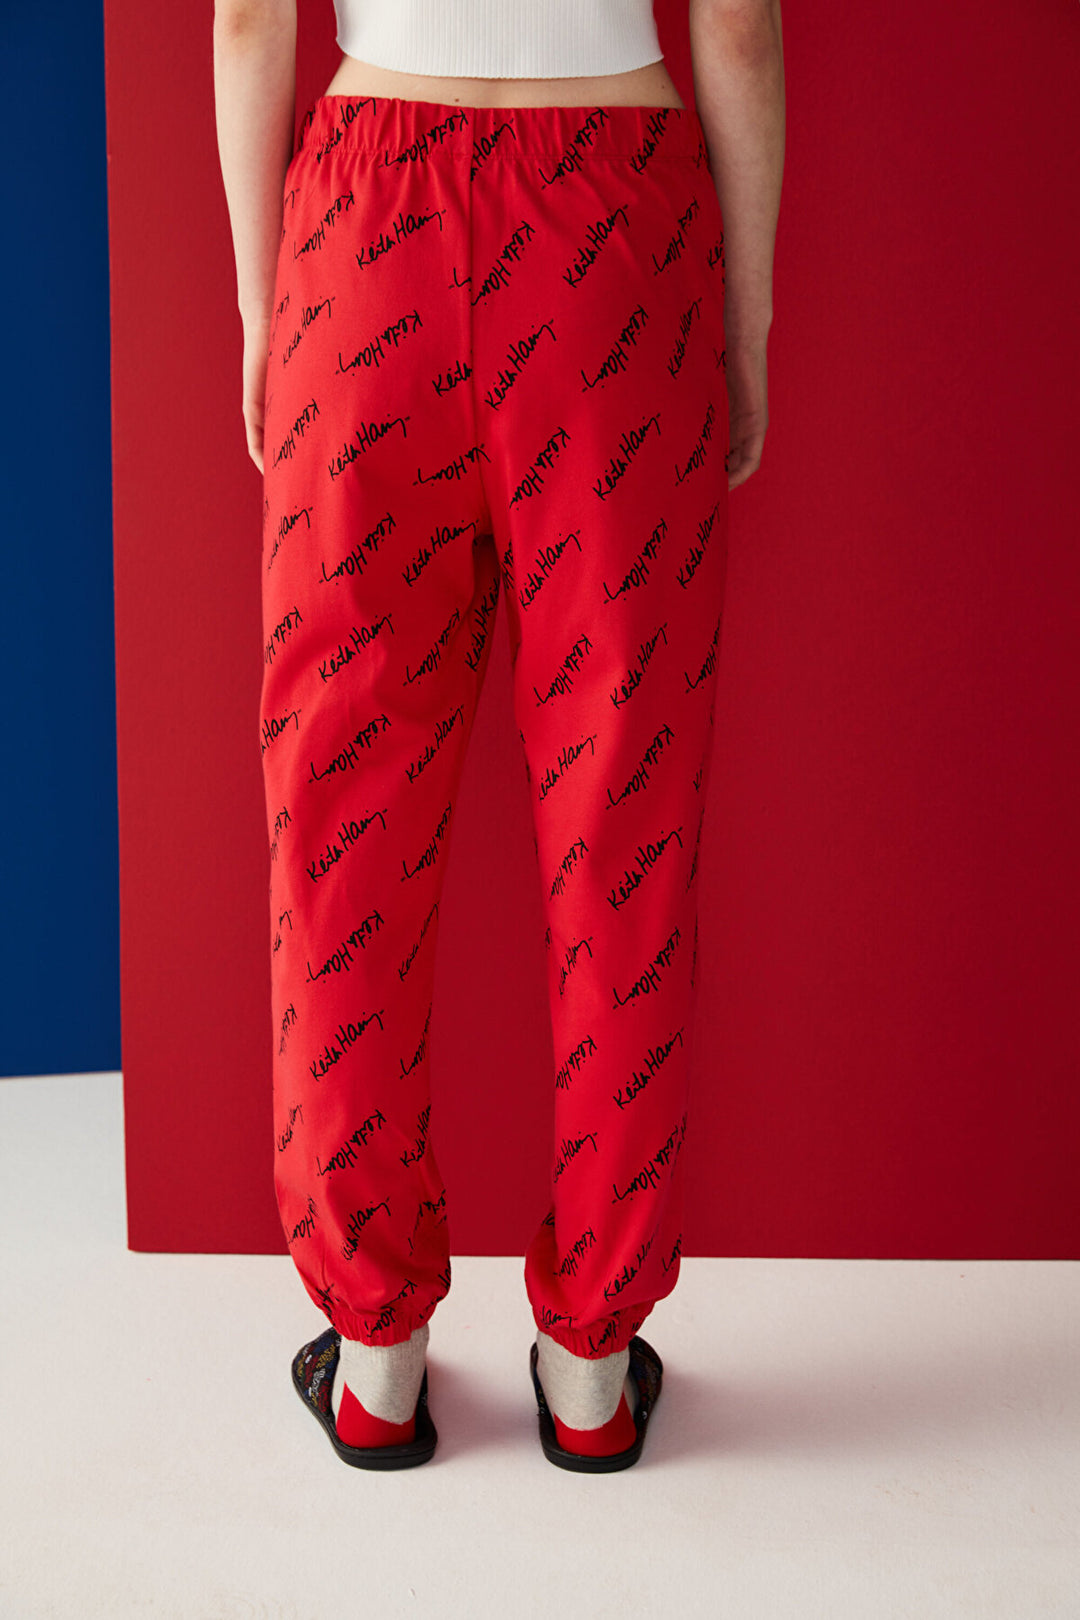 Cuffed Pants Pj Bottom-Keith Haring Collection